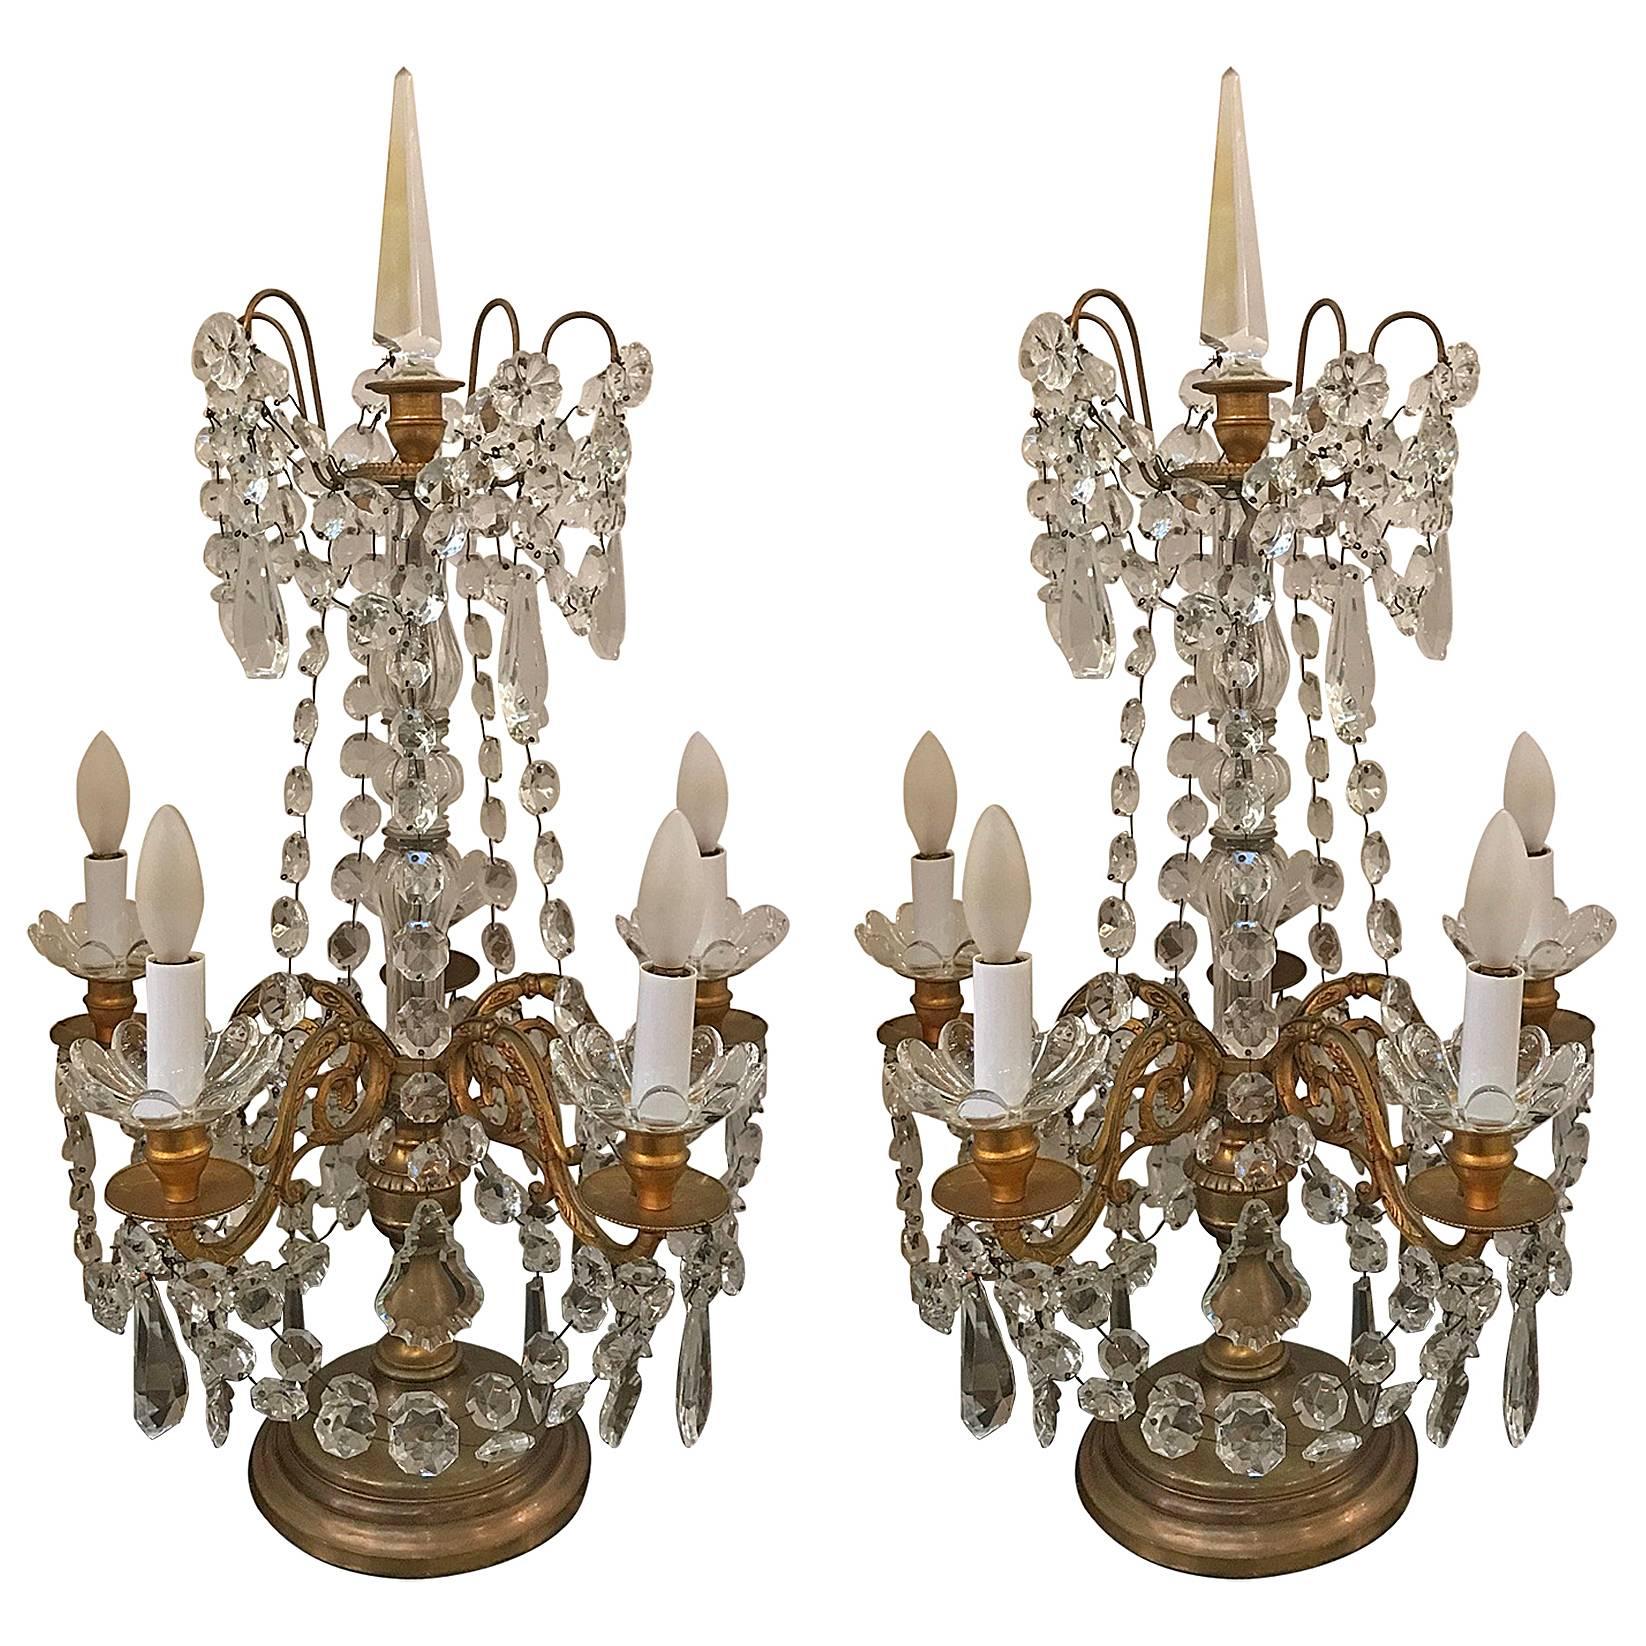 Large Pair of French Electrified Girandole Lamps